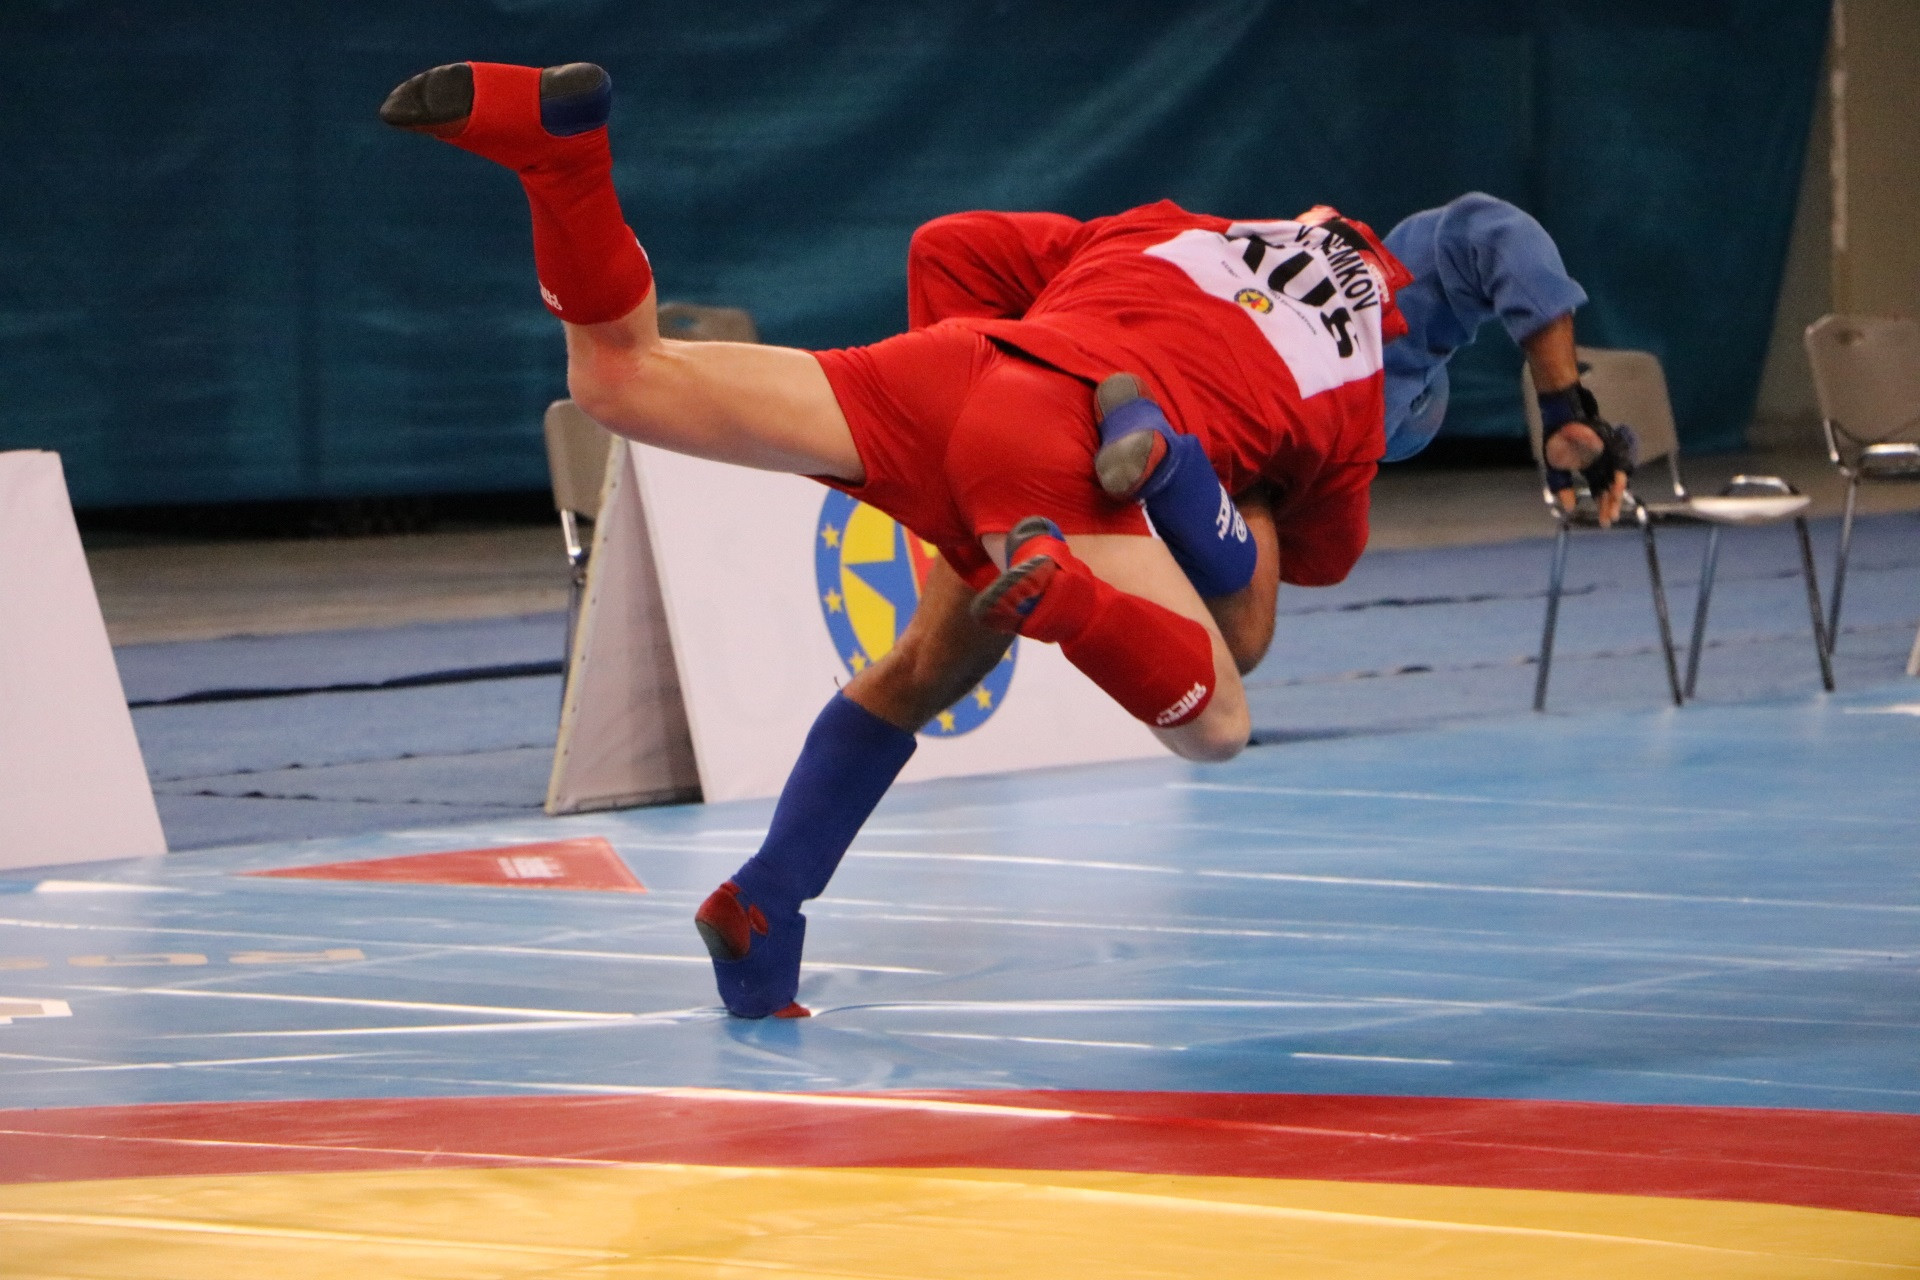 Voloshynov claims stunning win as Ukraine lead Russia in medal standings at European Sambo Championships